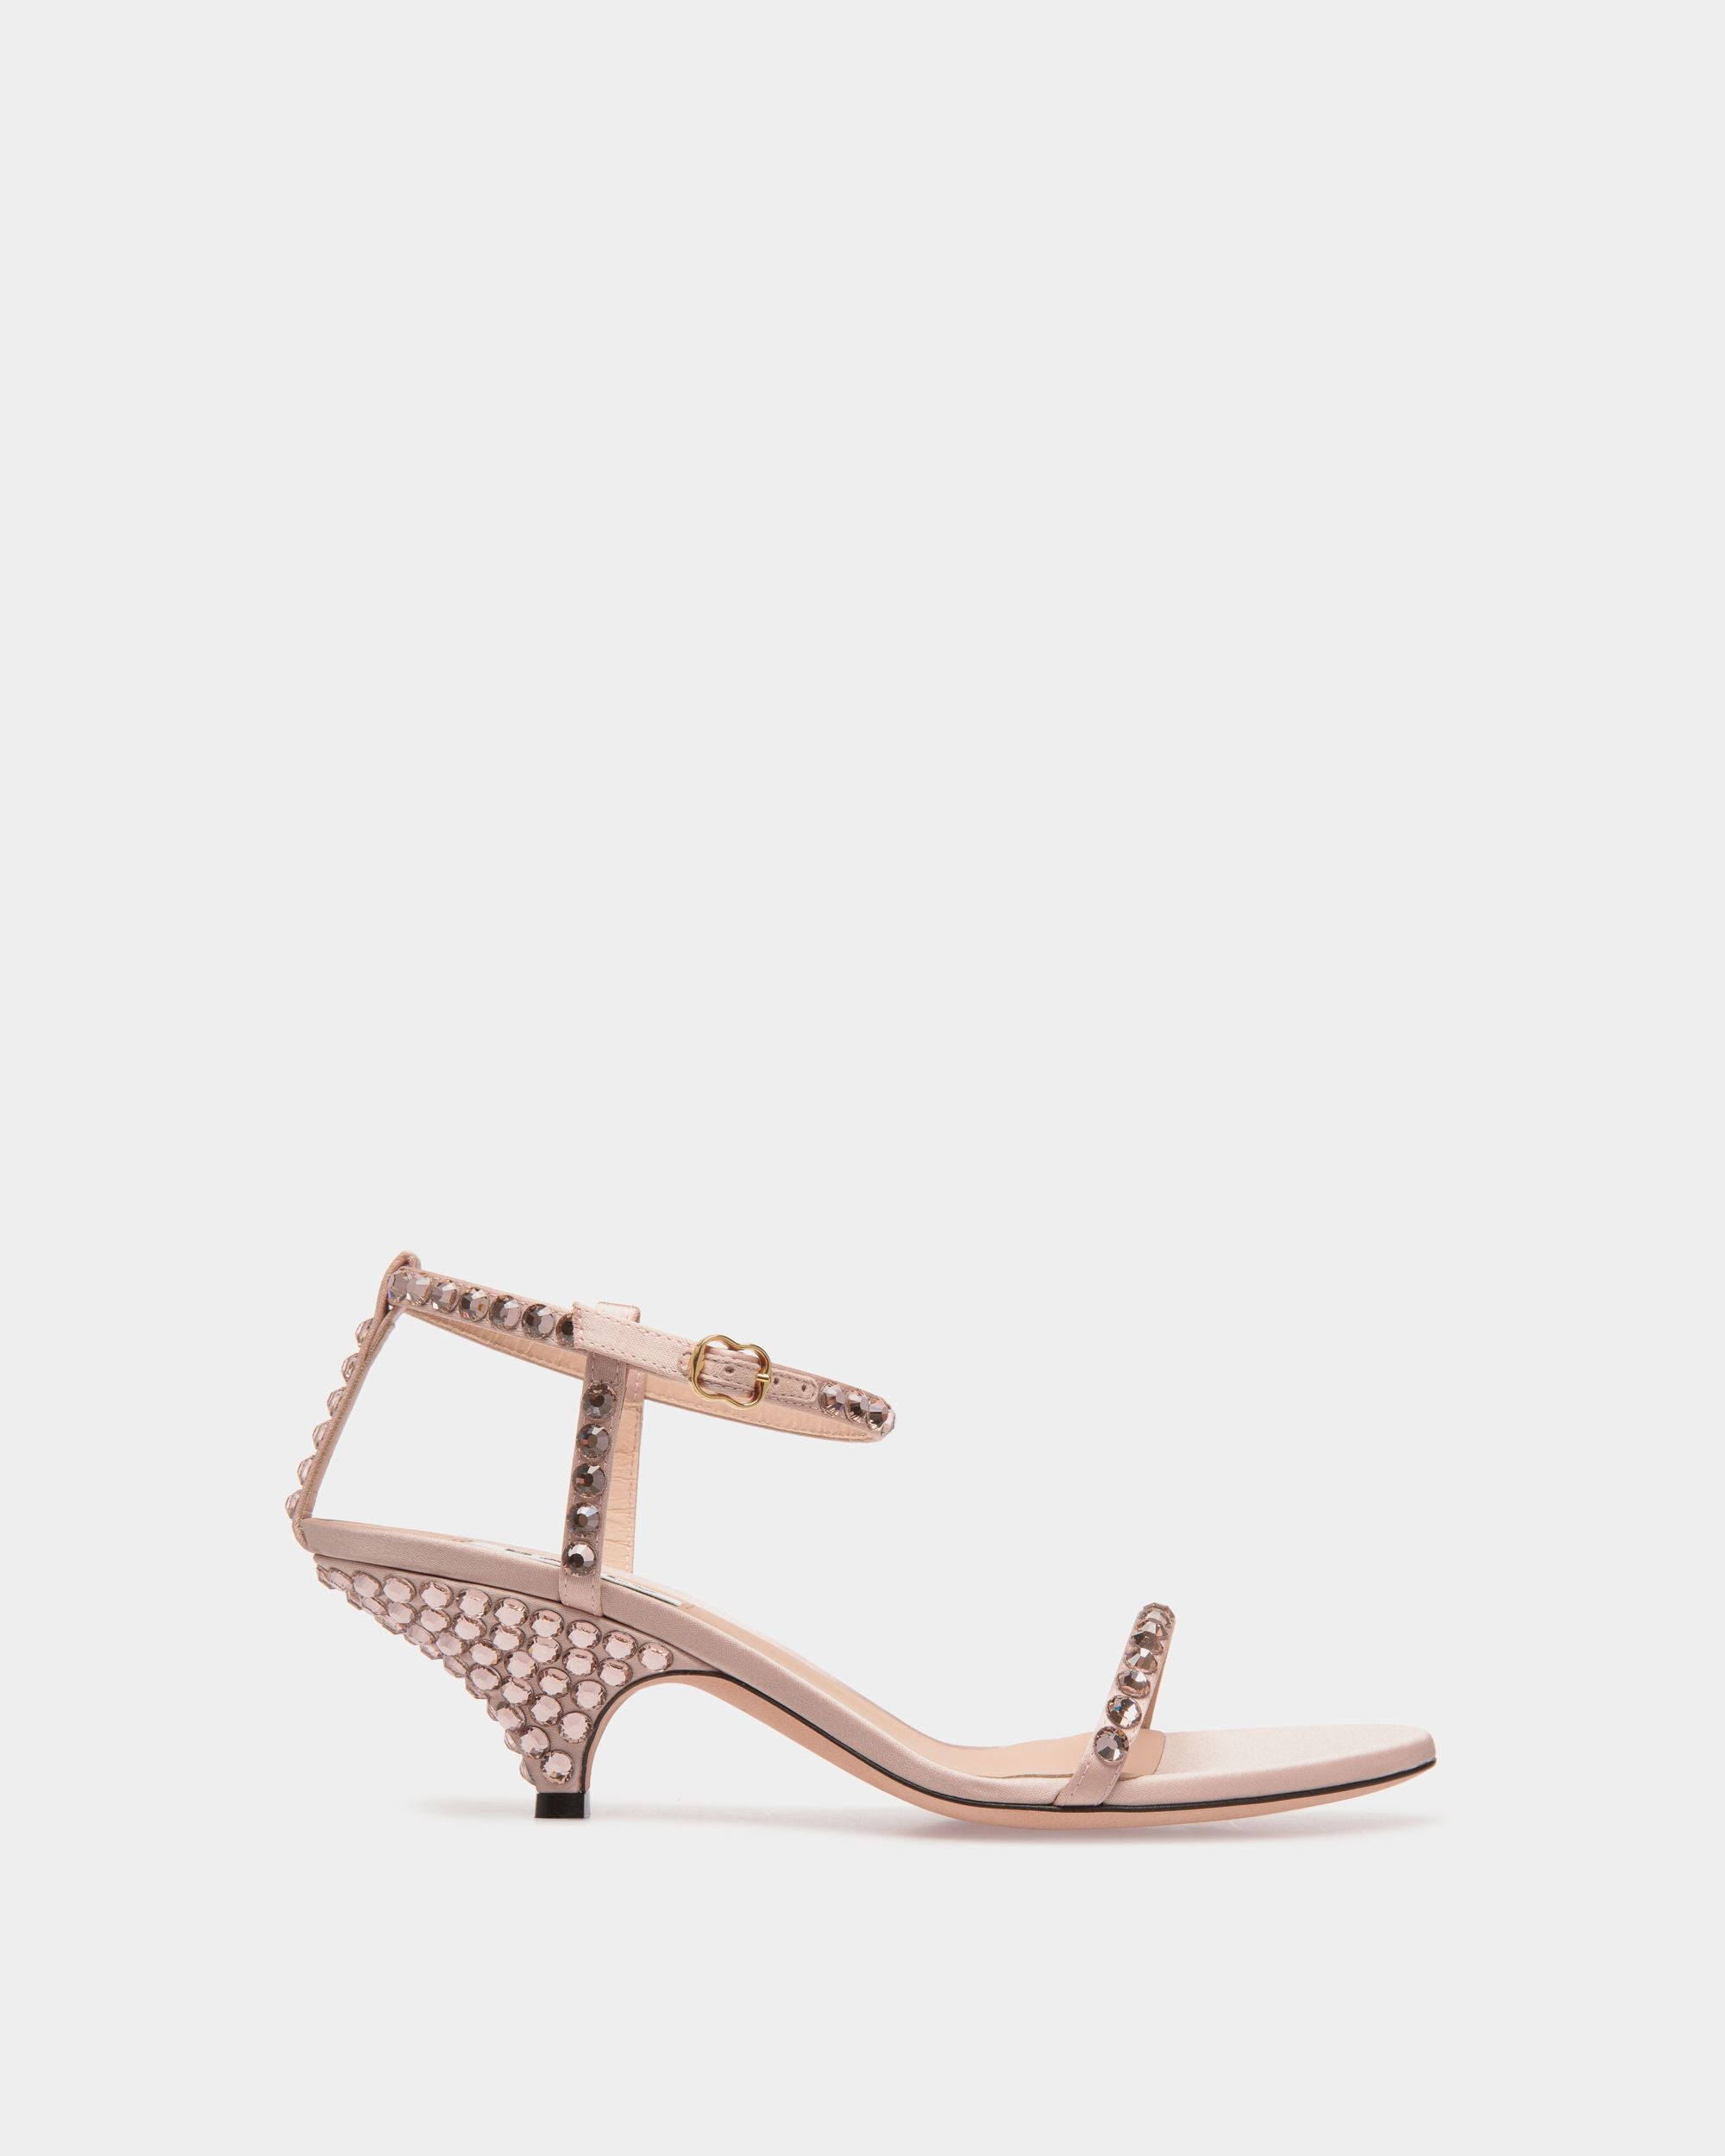 Women's Katy Heeled Sandal in Light Pink Fabric with Crystals | Bally | Still Life Side